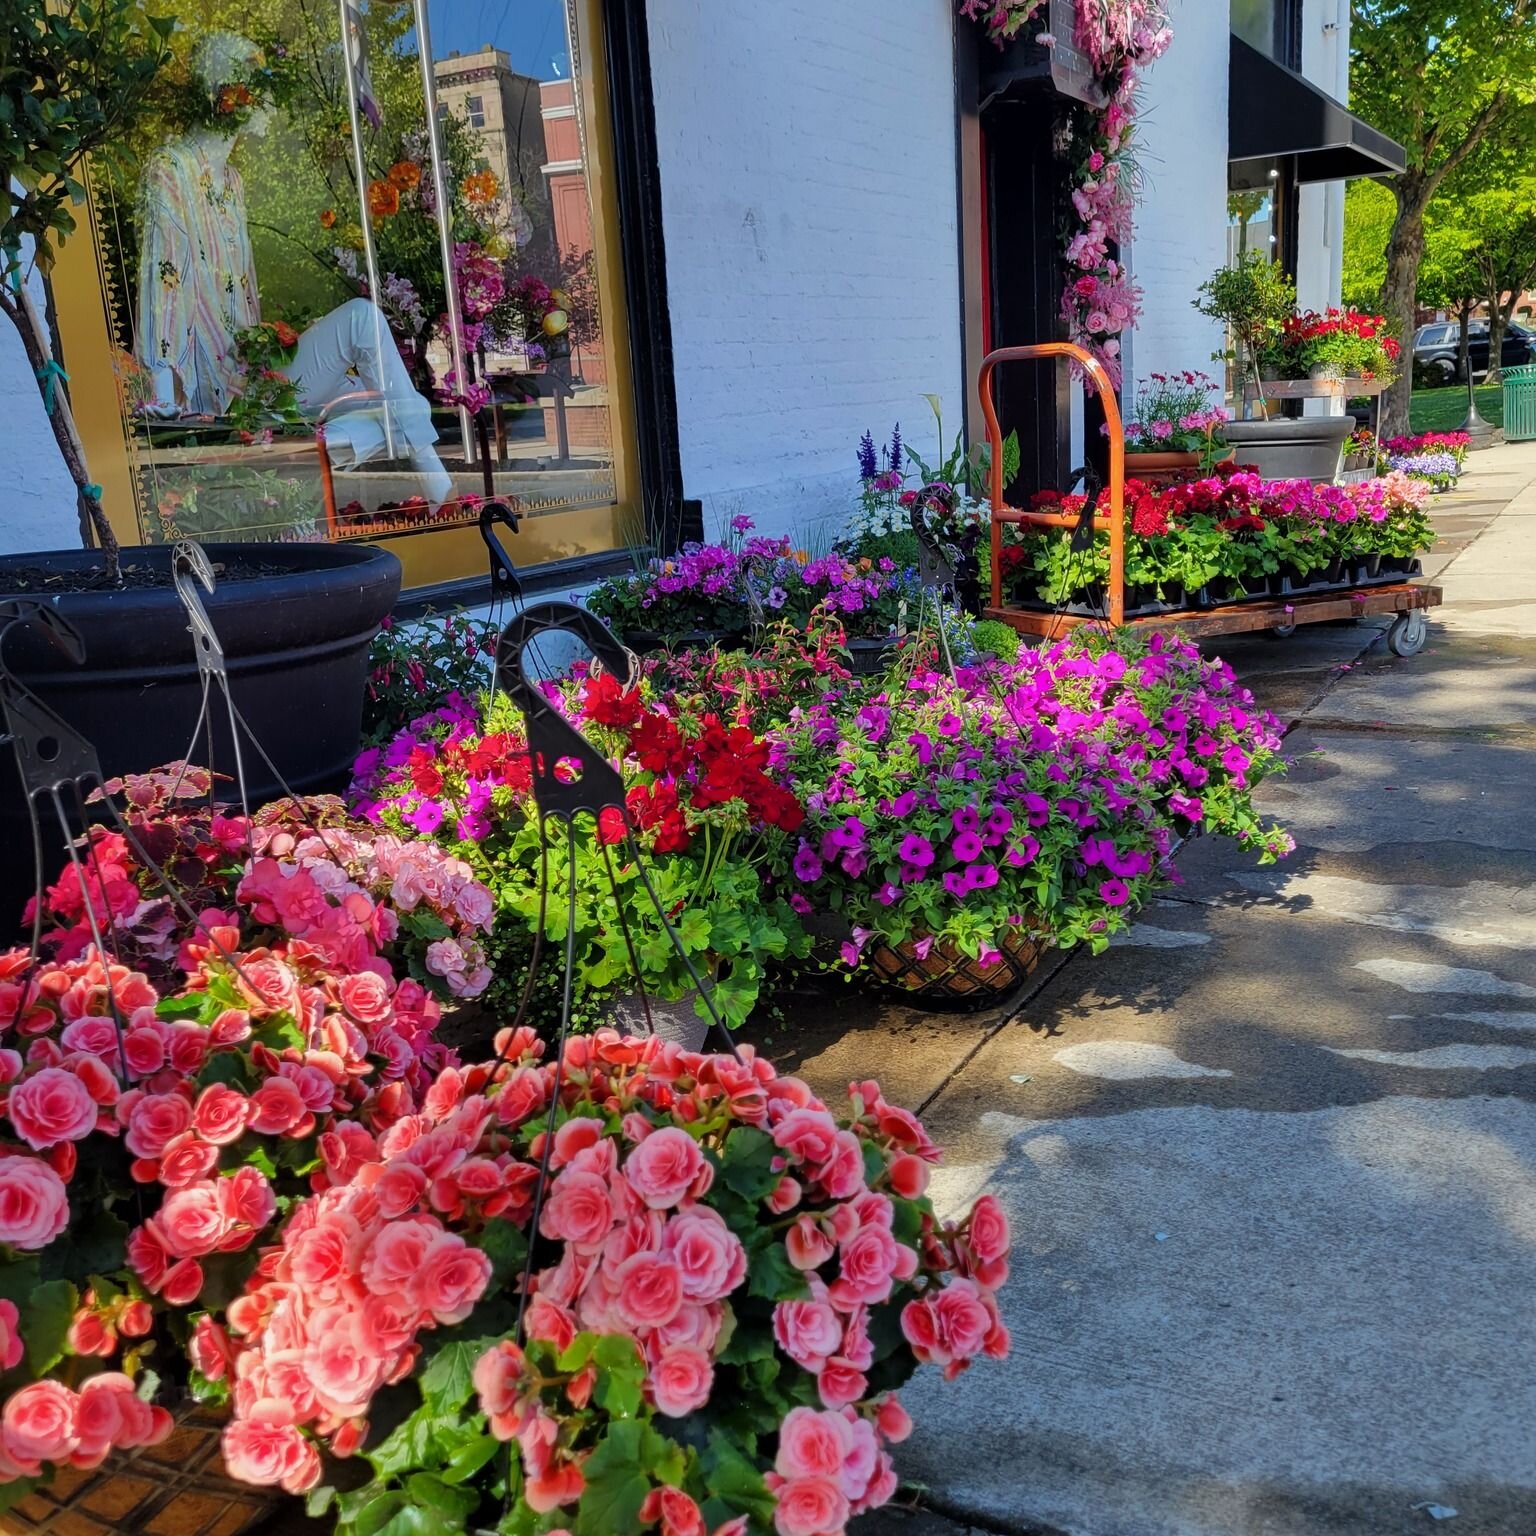 The flowers and tress are blooming in Historic Downtown Martinsburg and throughout Berkeley County. With Easter being this weekend, go ahead and plan a get away to Martinsburg, Berkeley County for a little shopping or just a country road drive.

#Eas